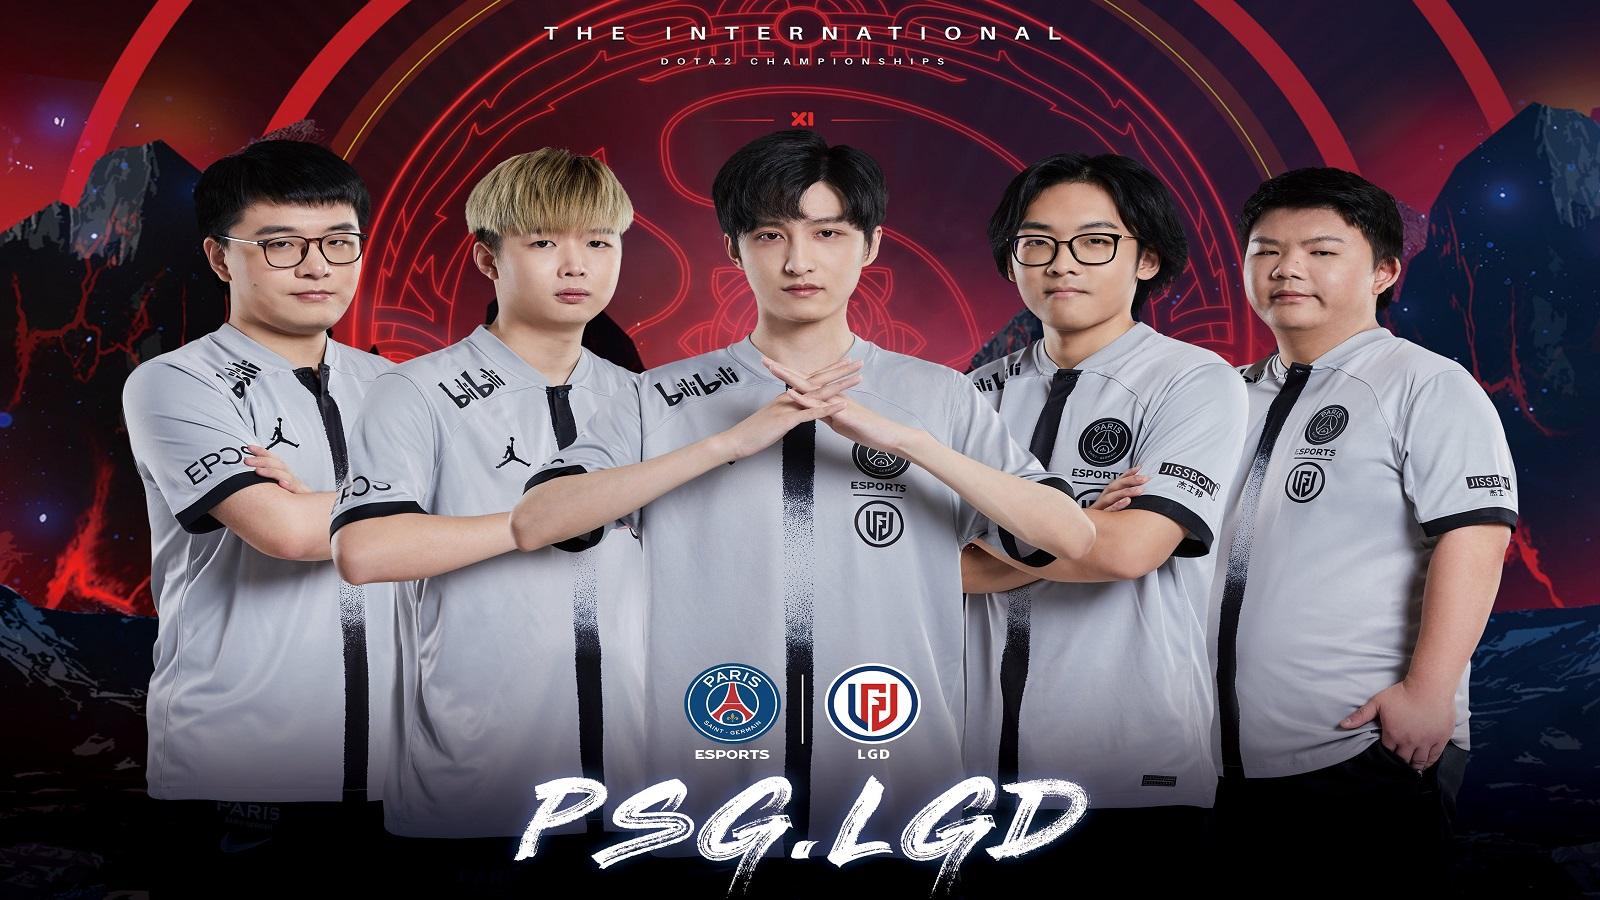 cover art featuring psg.lgd's dota 2 roster